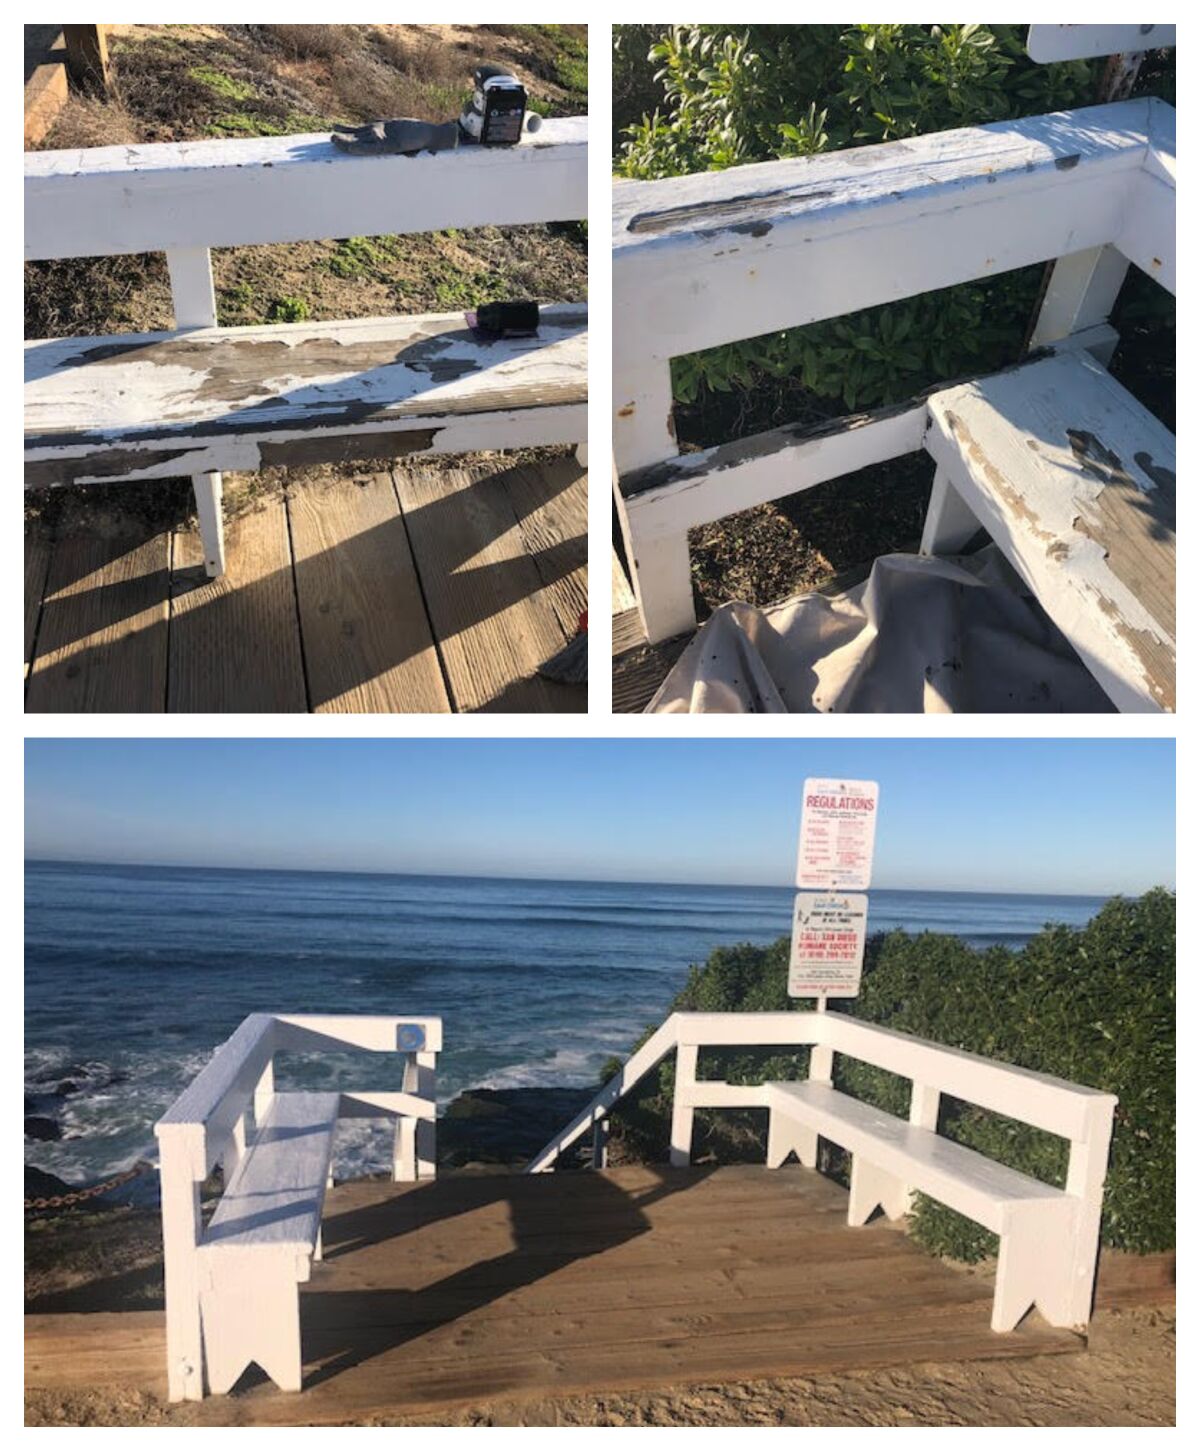 The "penalty box" at the top of the Windansea Beach access stairway before and after Joseph McGoldrick repainted it.